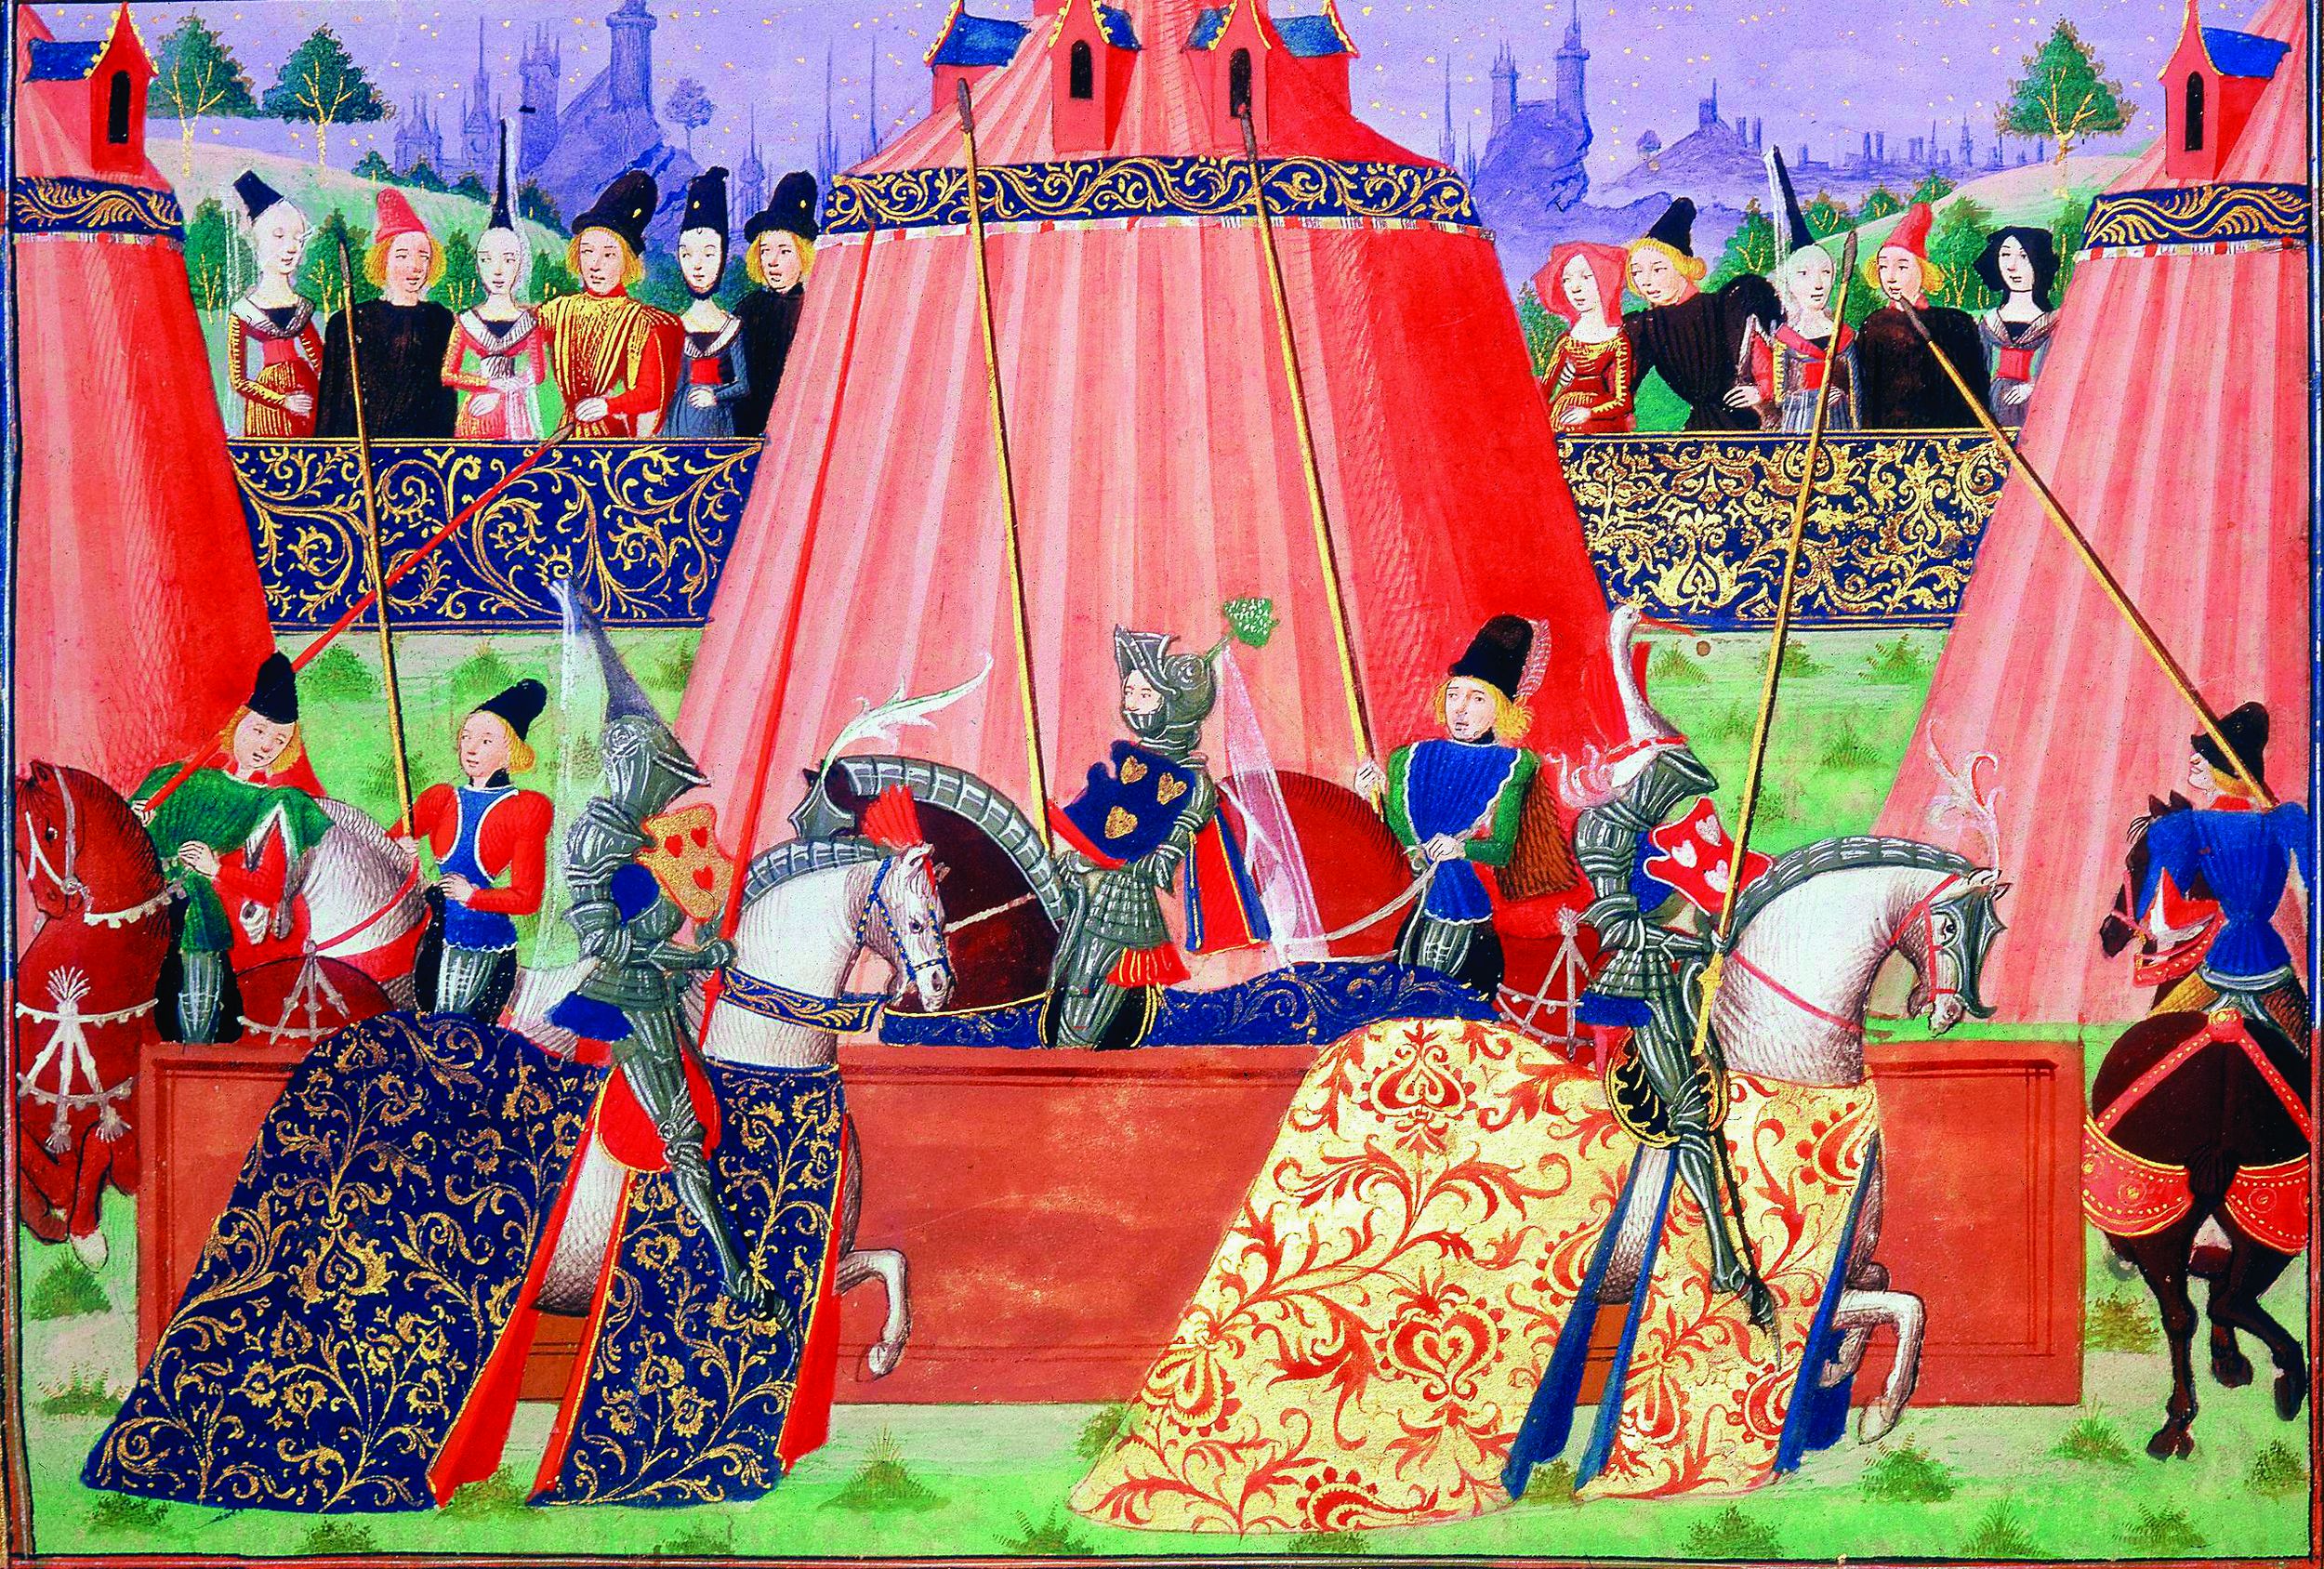 Knights in their finery take part in a royal tournament at St. Inglevert, France, in the 15th century.